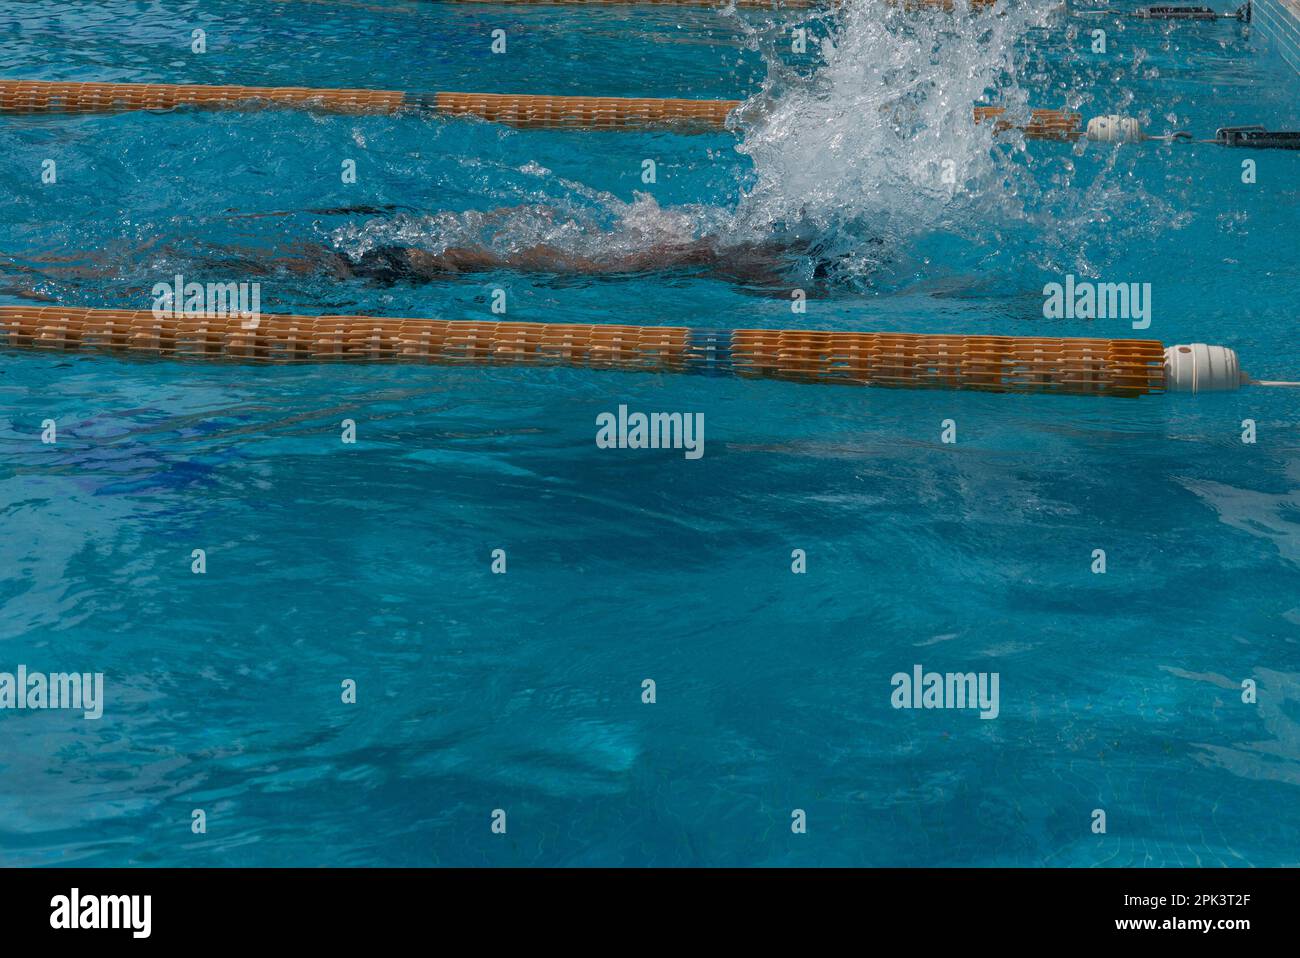 dive into the pool, Stock Photo